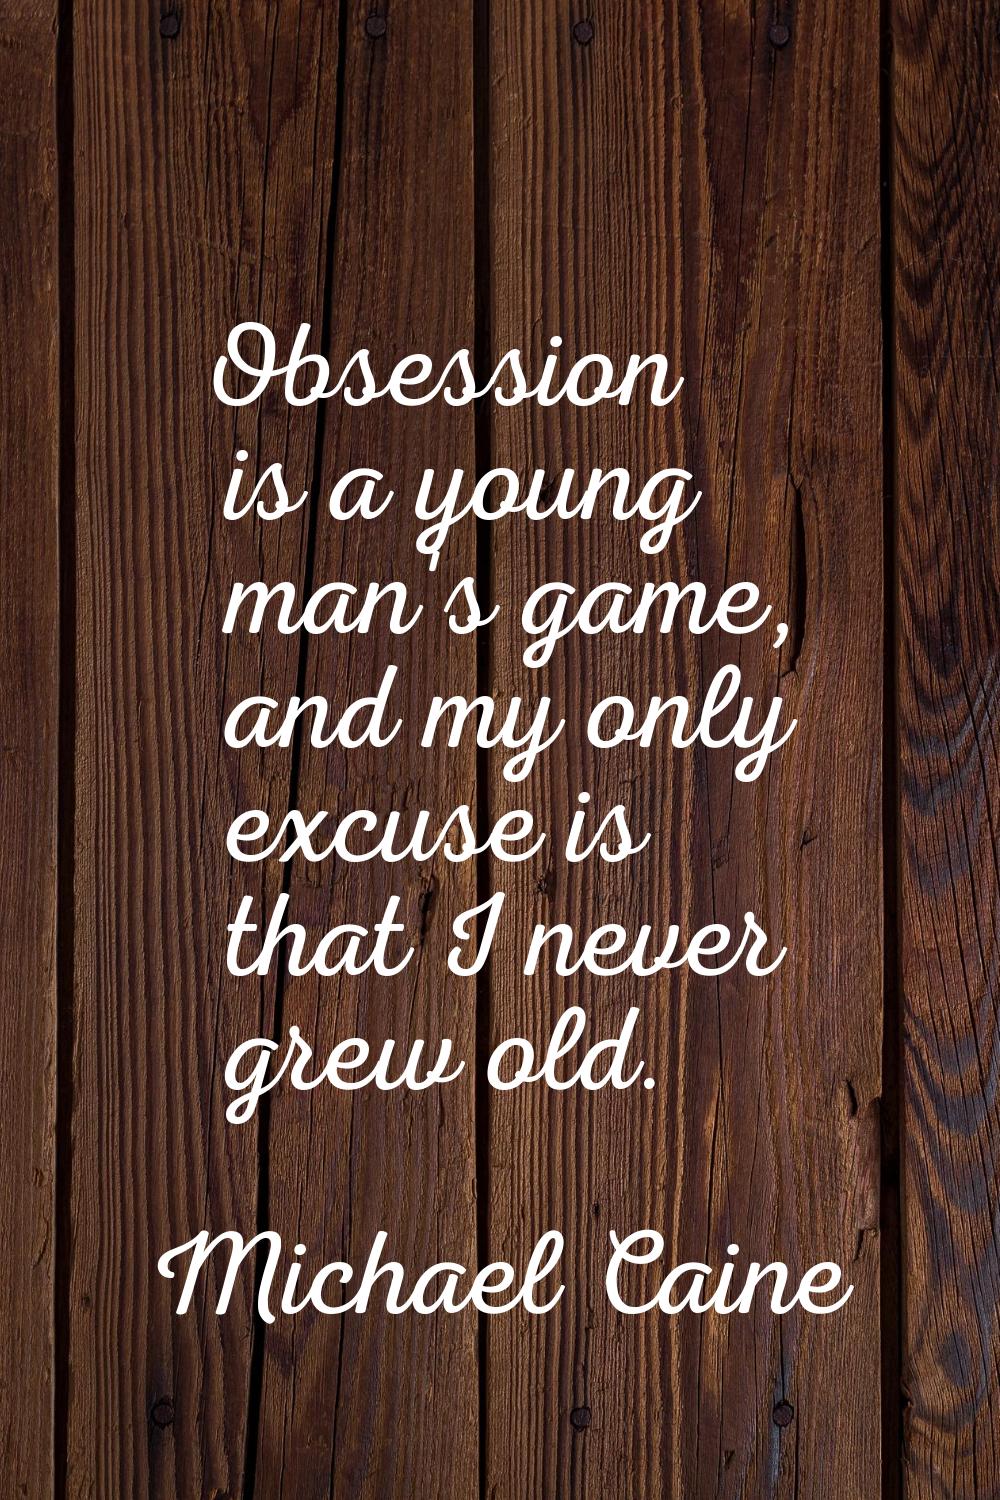 Obsession is a young man's game, and my only excuse is that I never grew old.